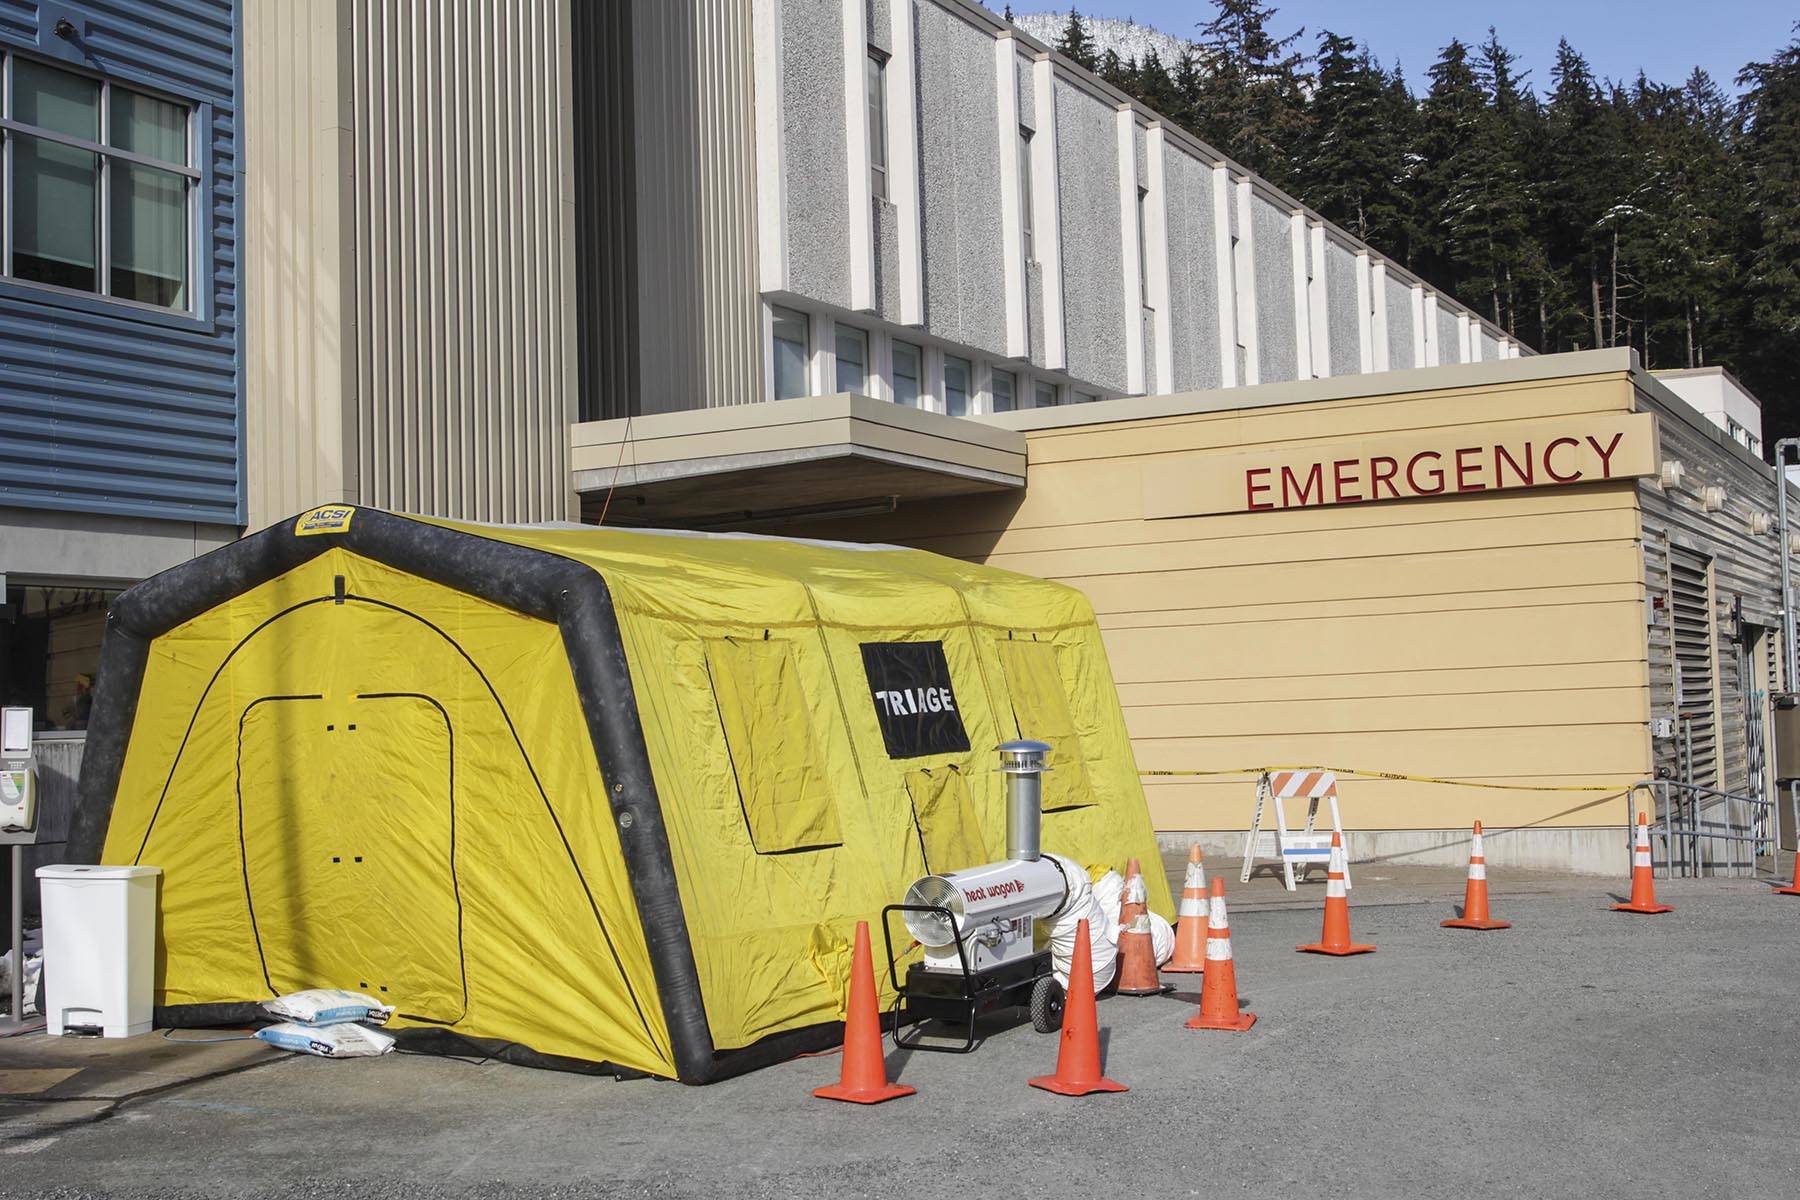 Bartlett Regional Hospital is one of many organizations in Juneau adjusting its operating procedures to deal with the risk of outbreak of the coronavirus. (Michael S. Lockett | Juneau Empire)